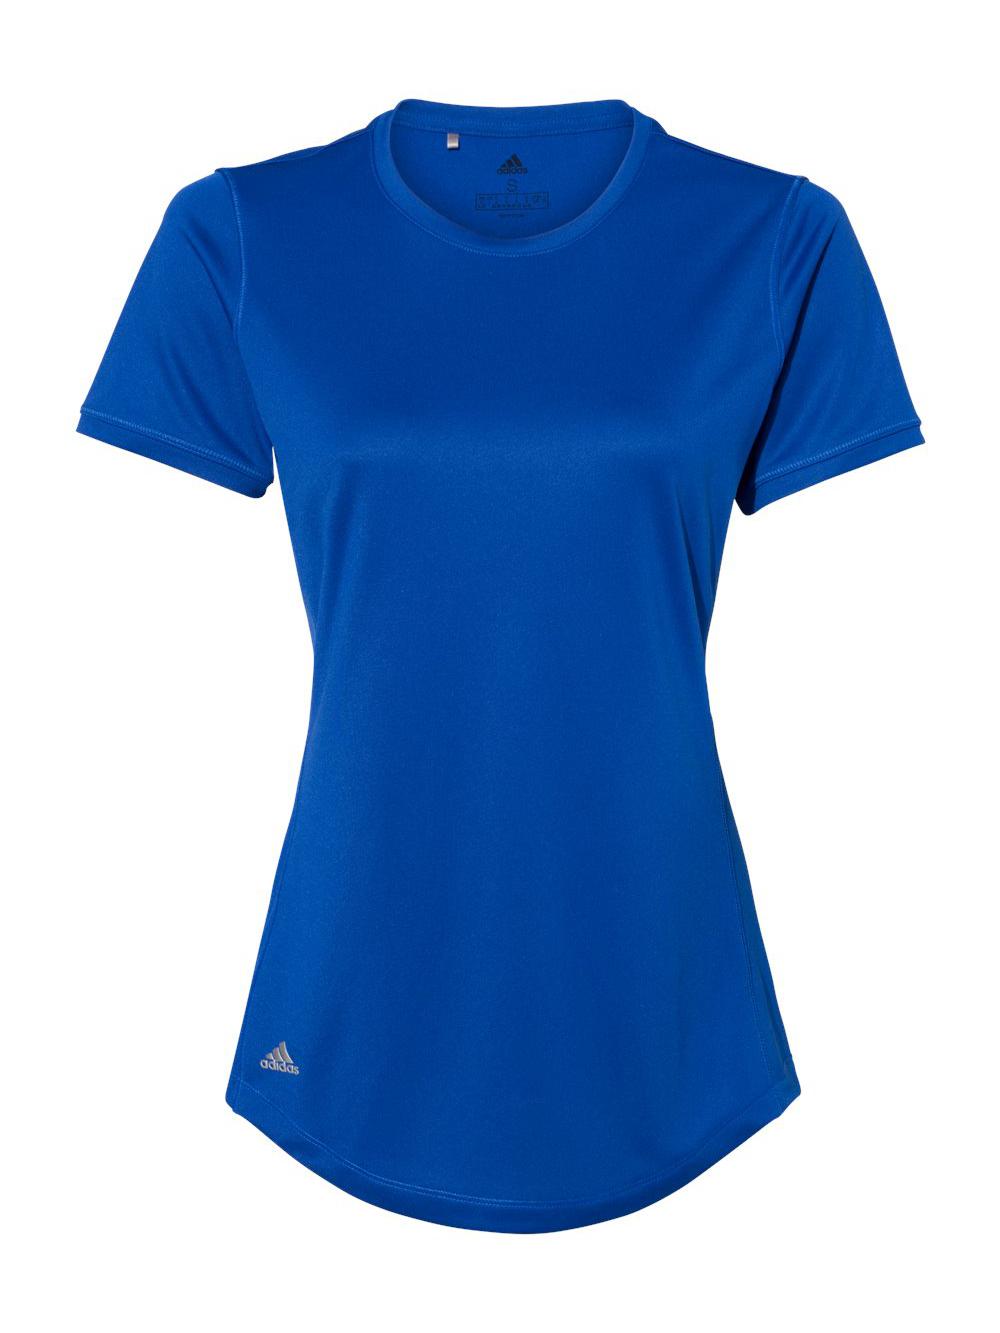 Adidas - Women's Sport T-Shirt - A377 - Collegiate Royal - Size: S - image 2 of 3